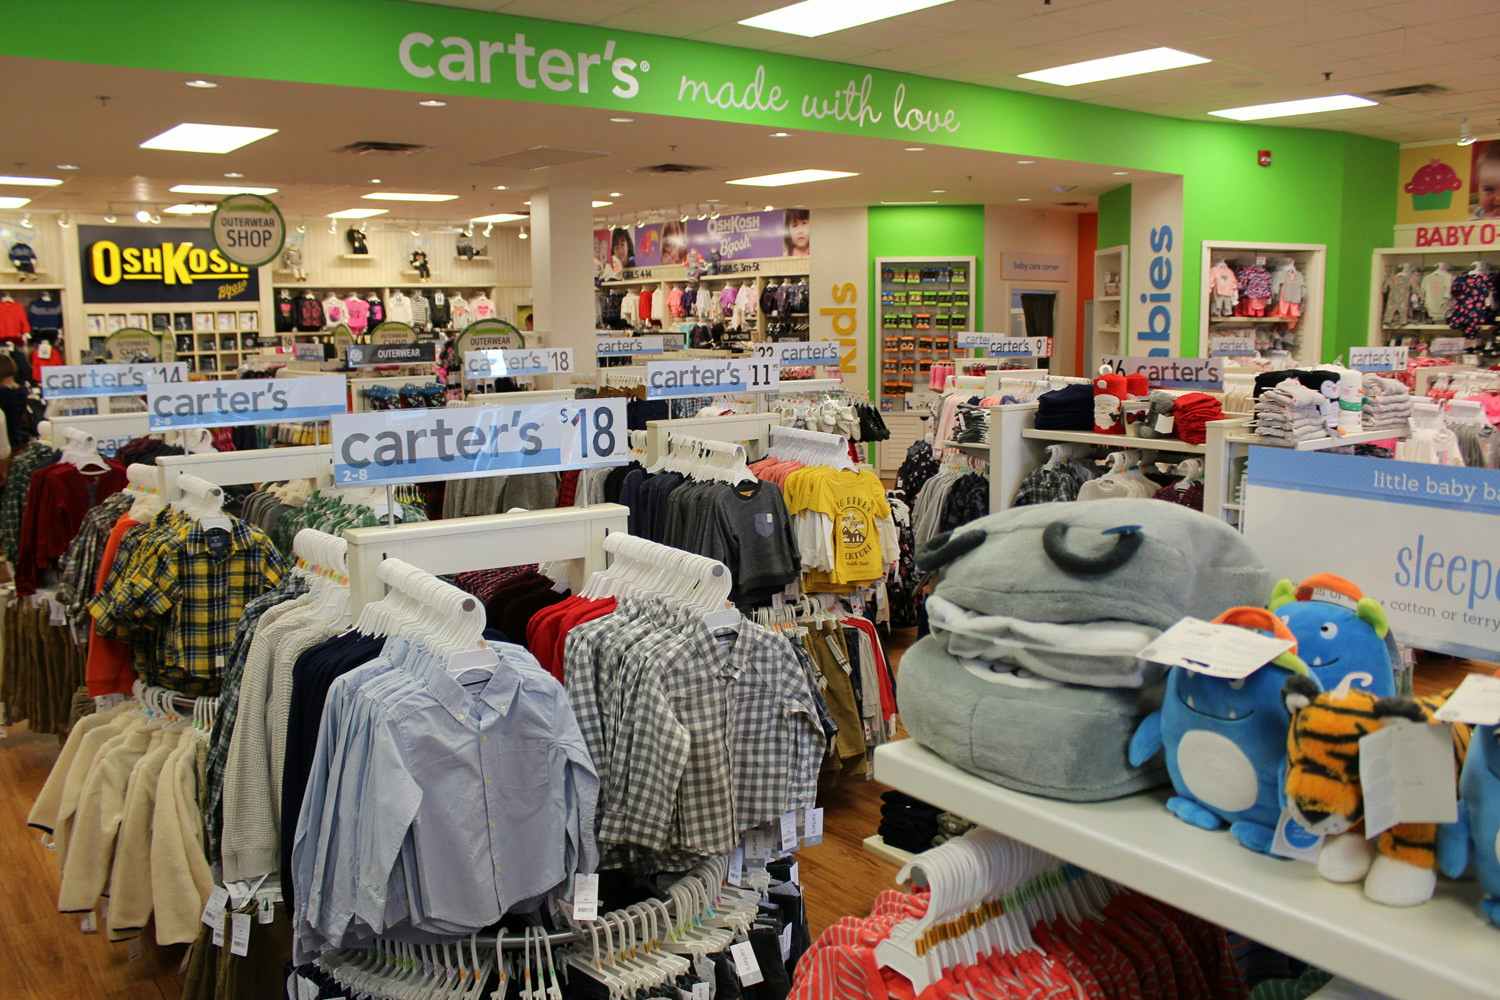 A Carter's oulet store with children's clothing on racks and shelves.